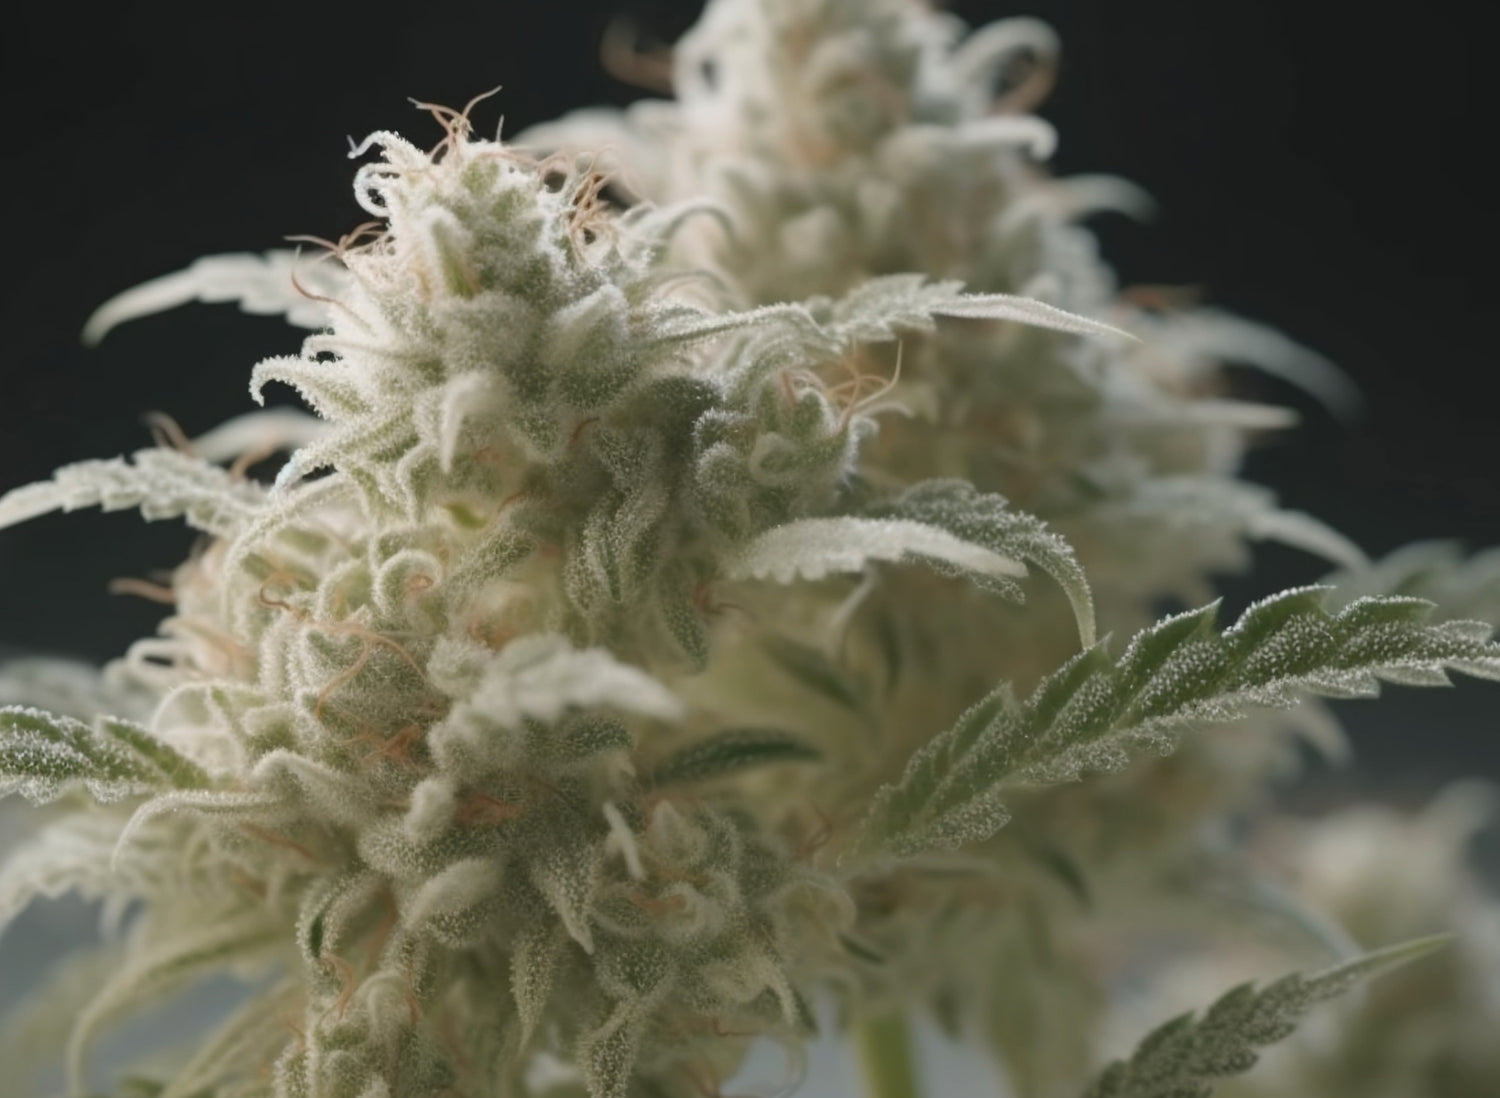 Albino Weed: Real or Urban Legend?